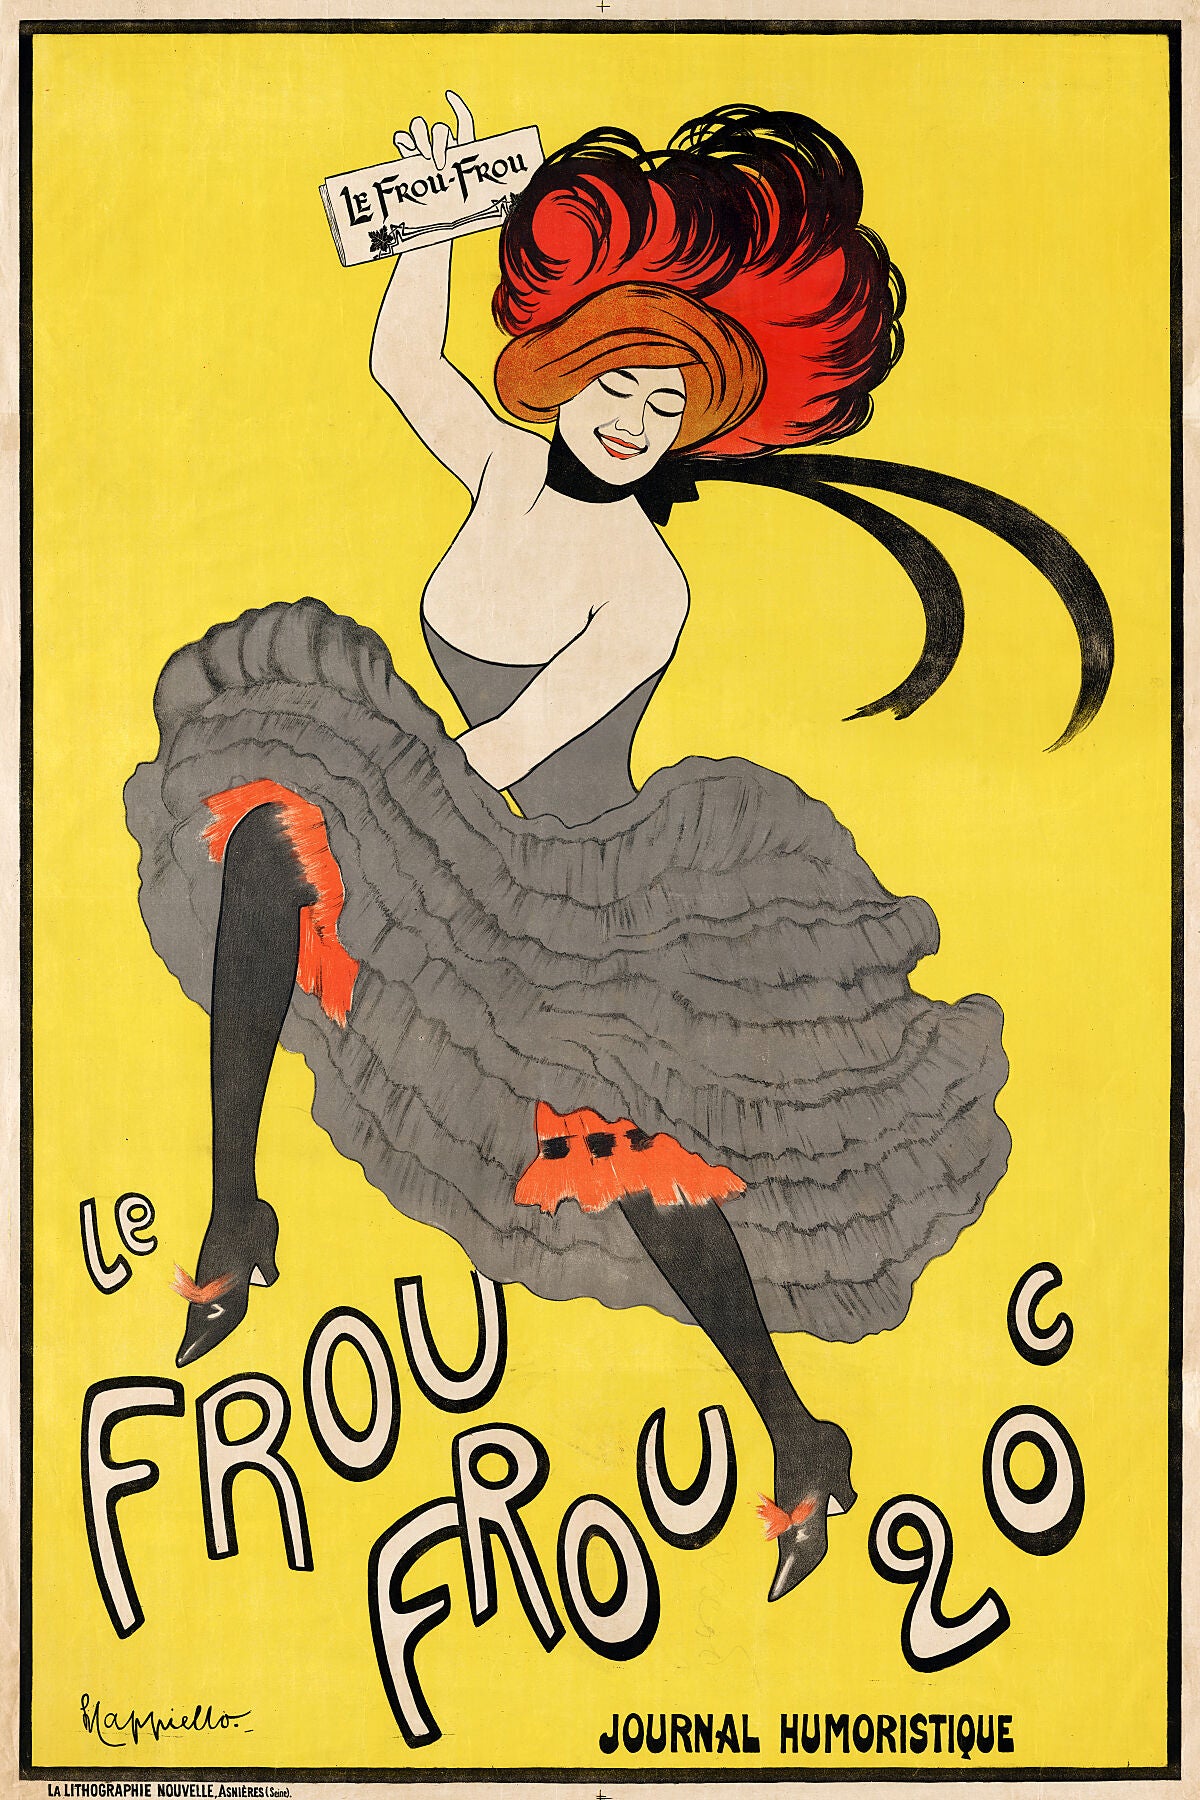 Products poster by Leonetto Cappiello shows a can-can dancer holding a copy of Le Frou Frou while she dances